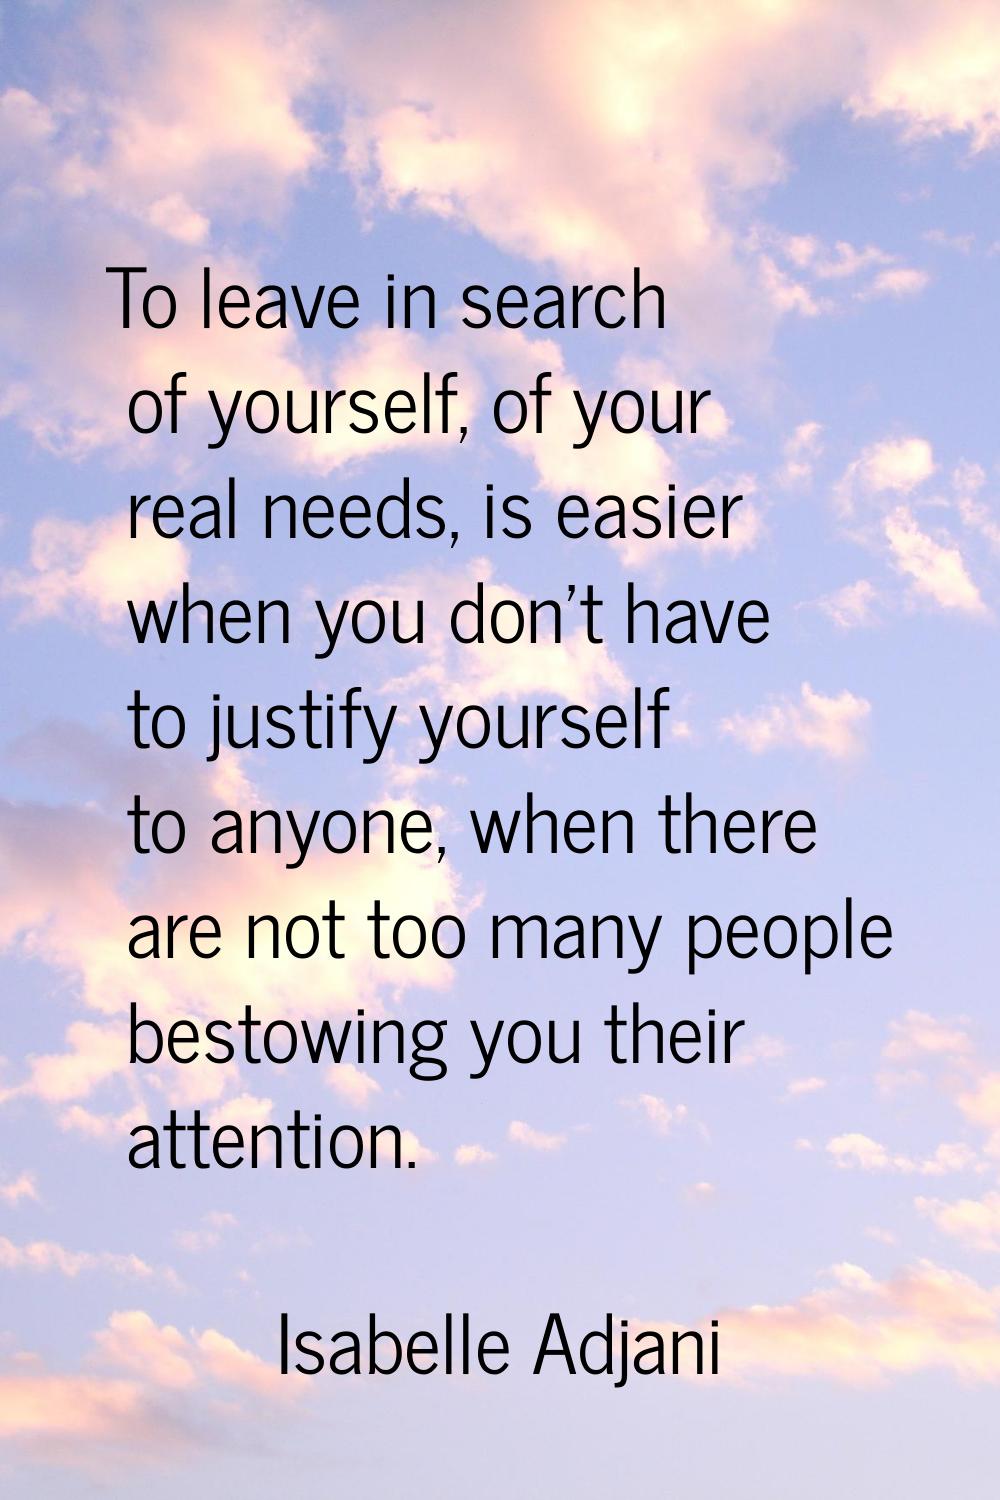 To leave in search of yourself, of your real needs, is easier when you don't have to justify yourse